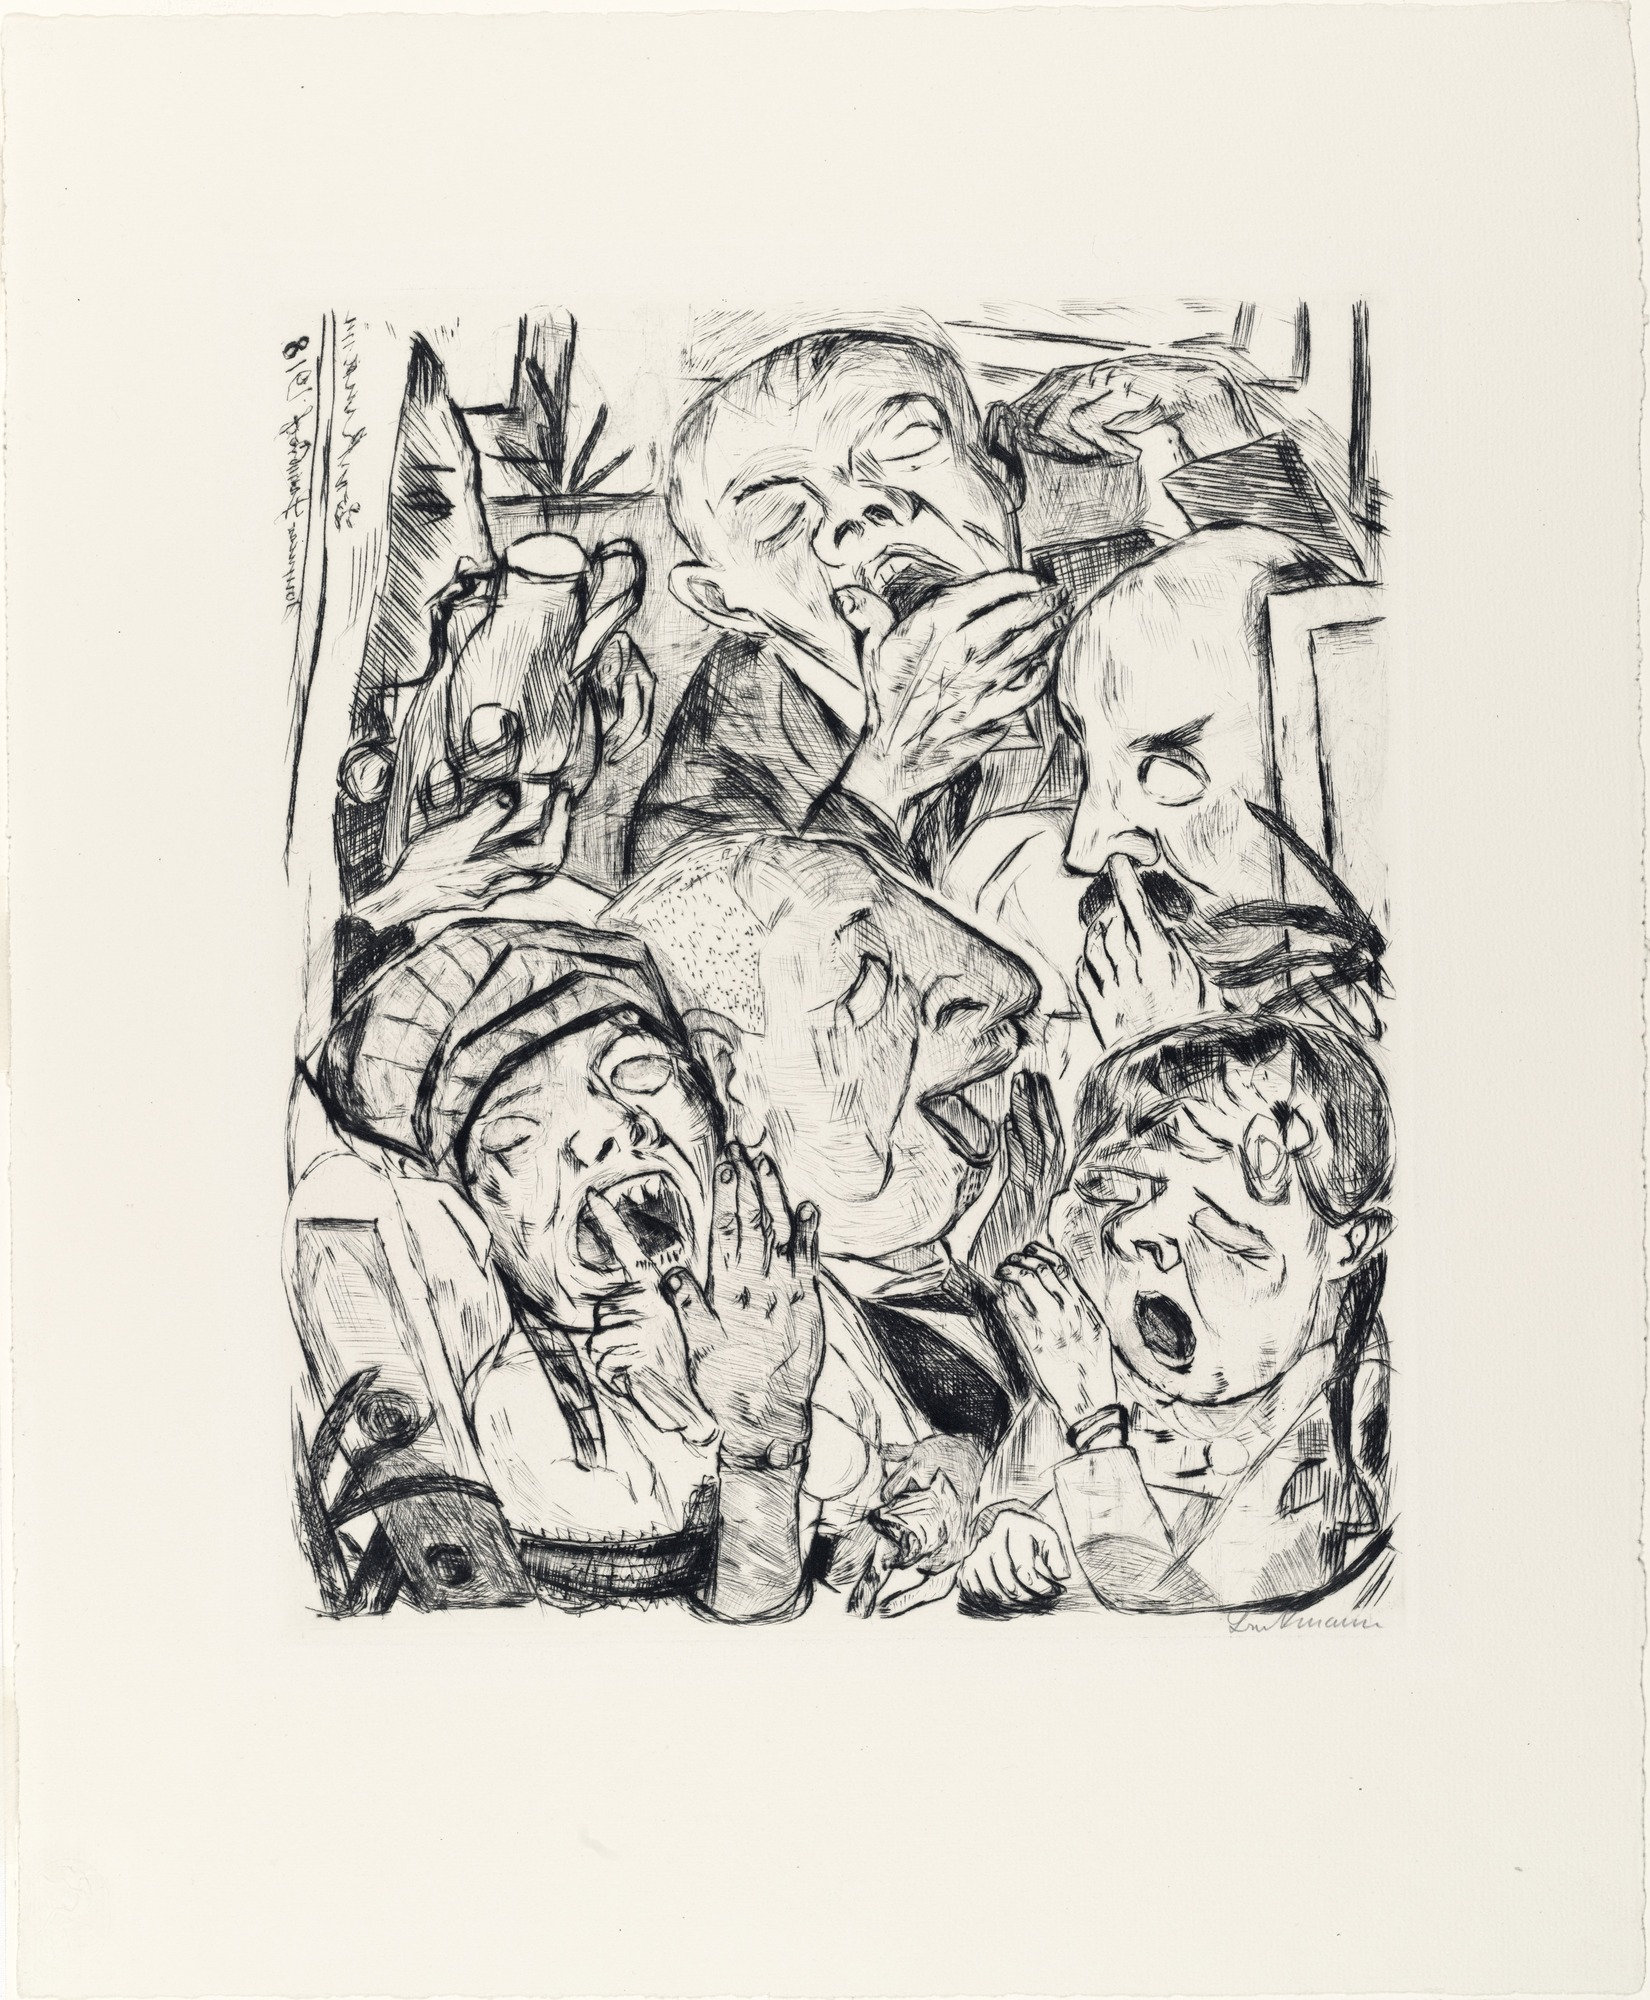 MoMA Collection | Max Beckmann. Faces (Gesichter). 1919 executed: 1915-1918)